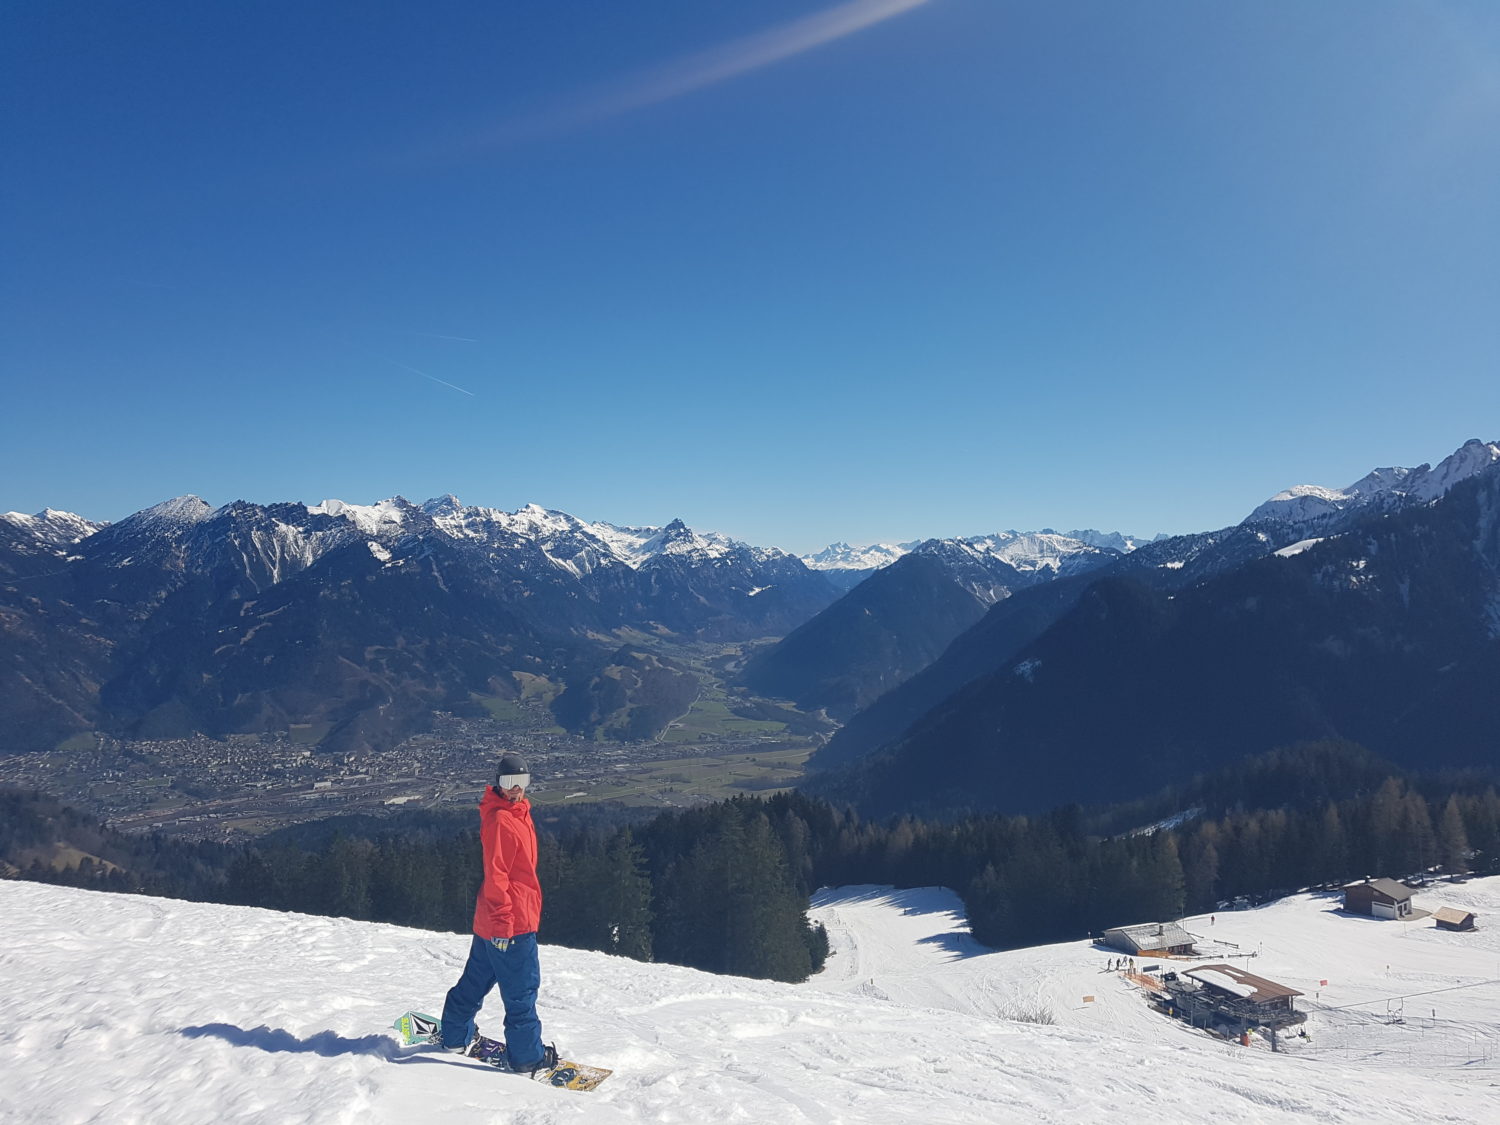 Simon enjoying the View - Bludenz in the Background